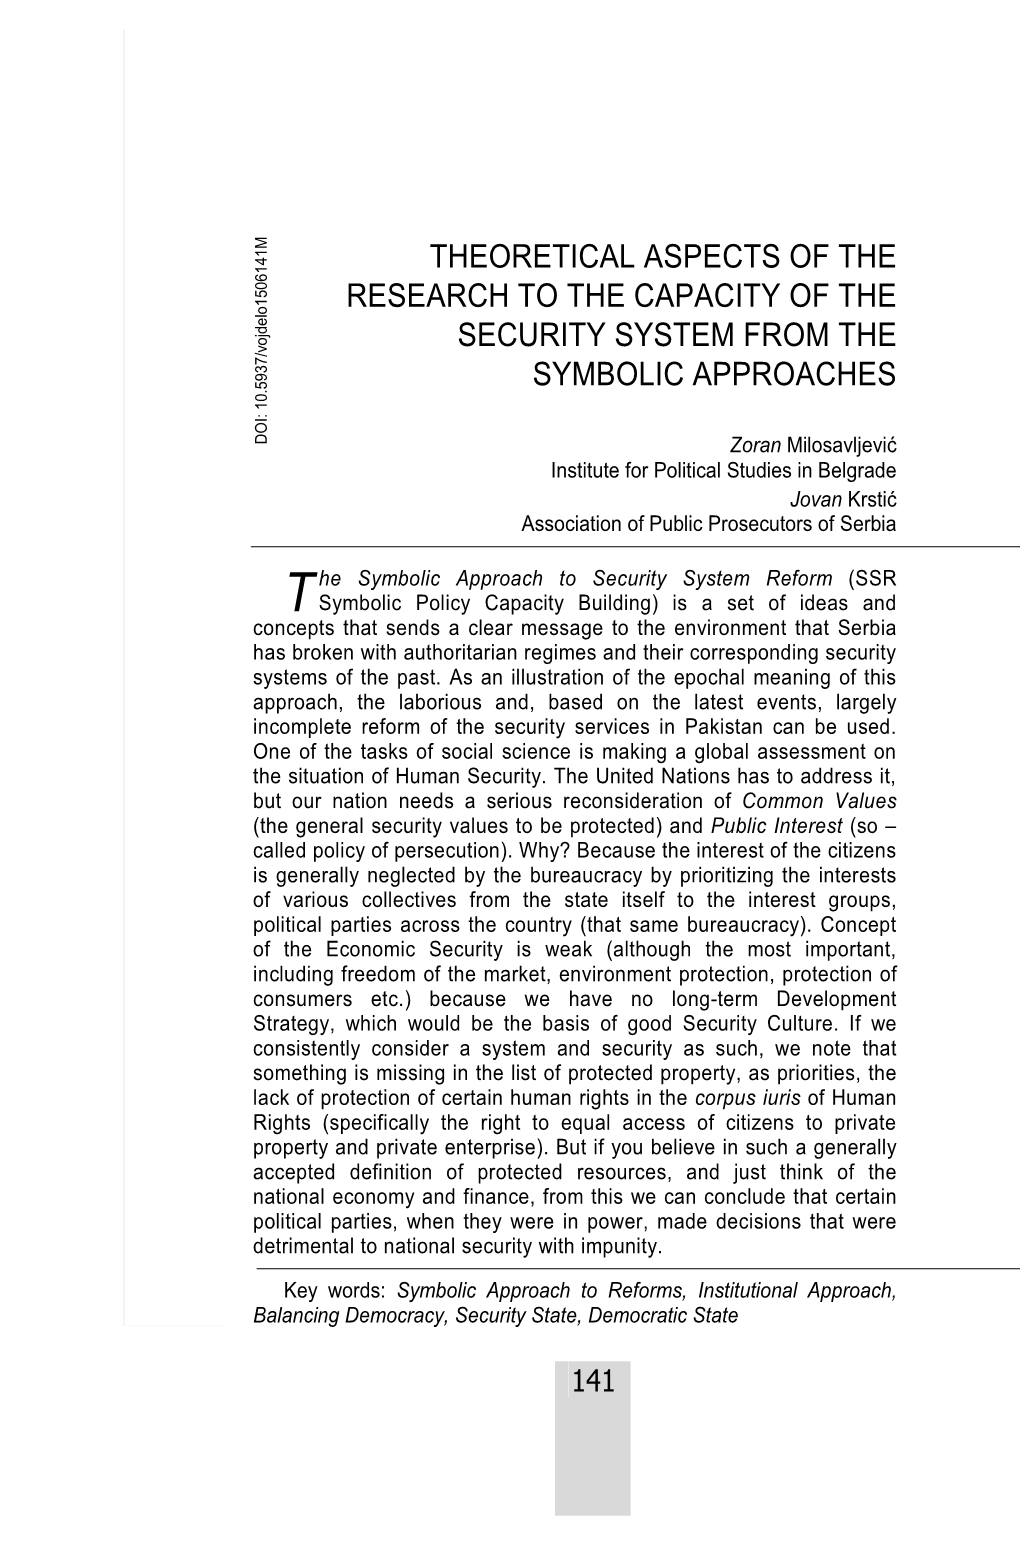 Theoretical Aspects of the Research to the Capacity of the Security System from the Symbolic Approaches